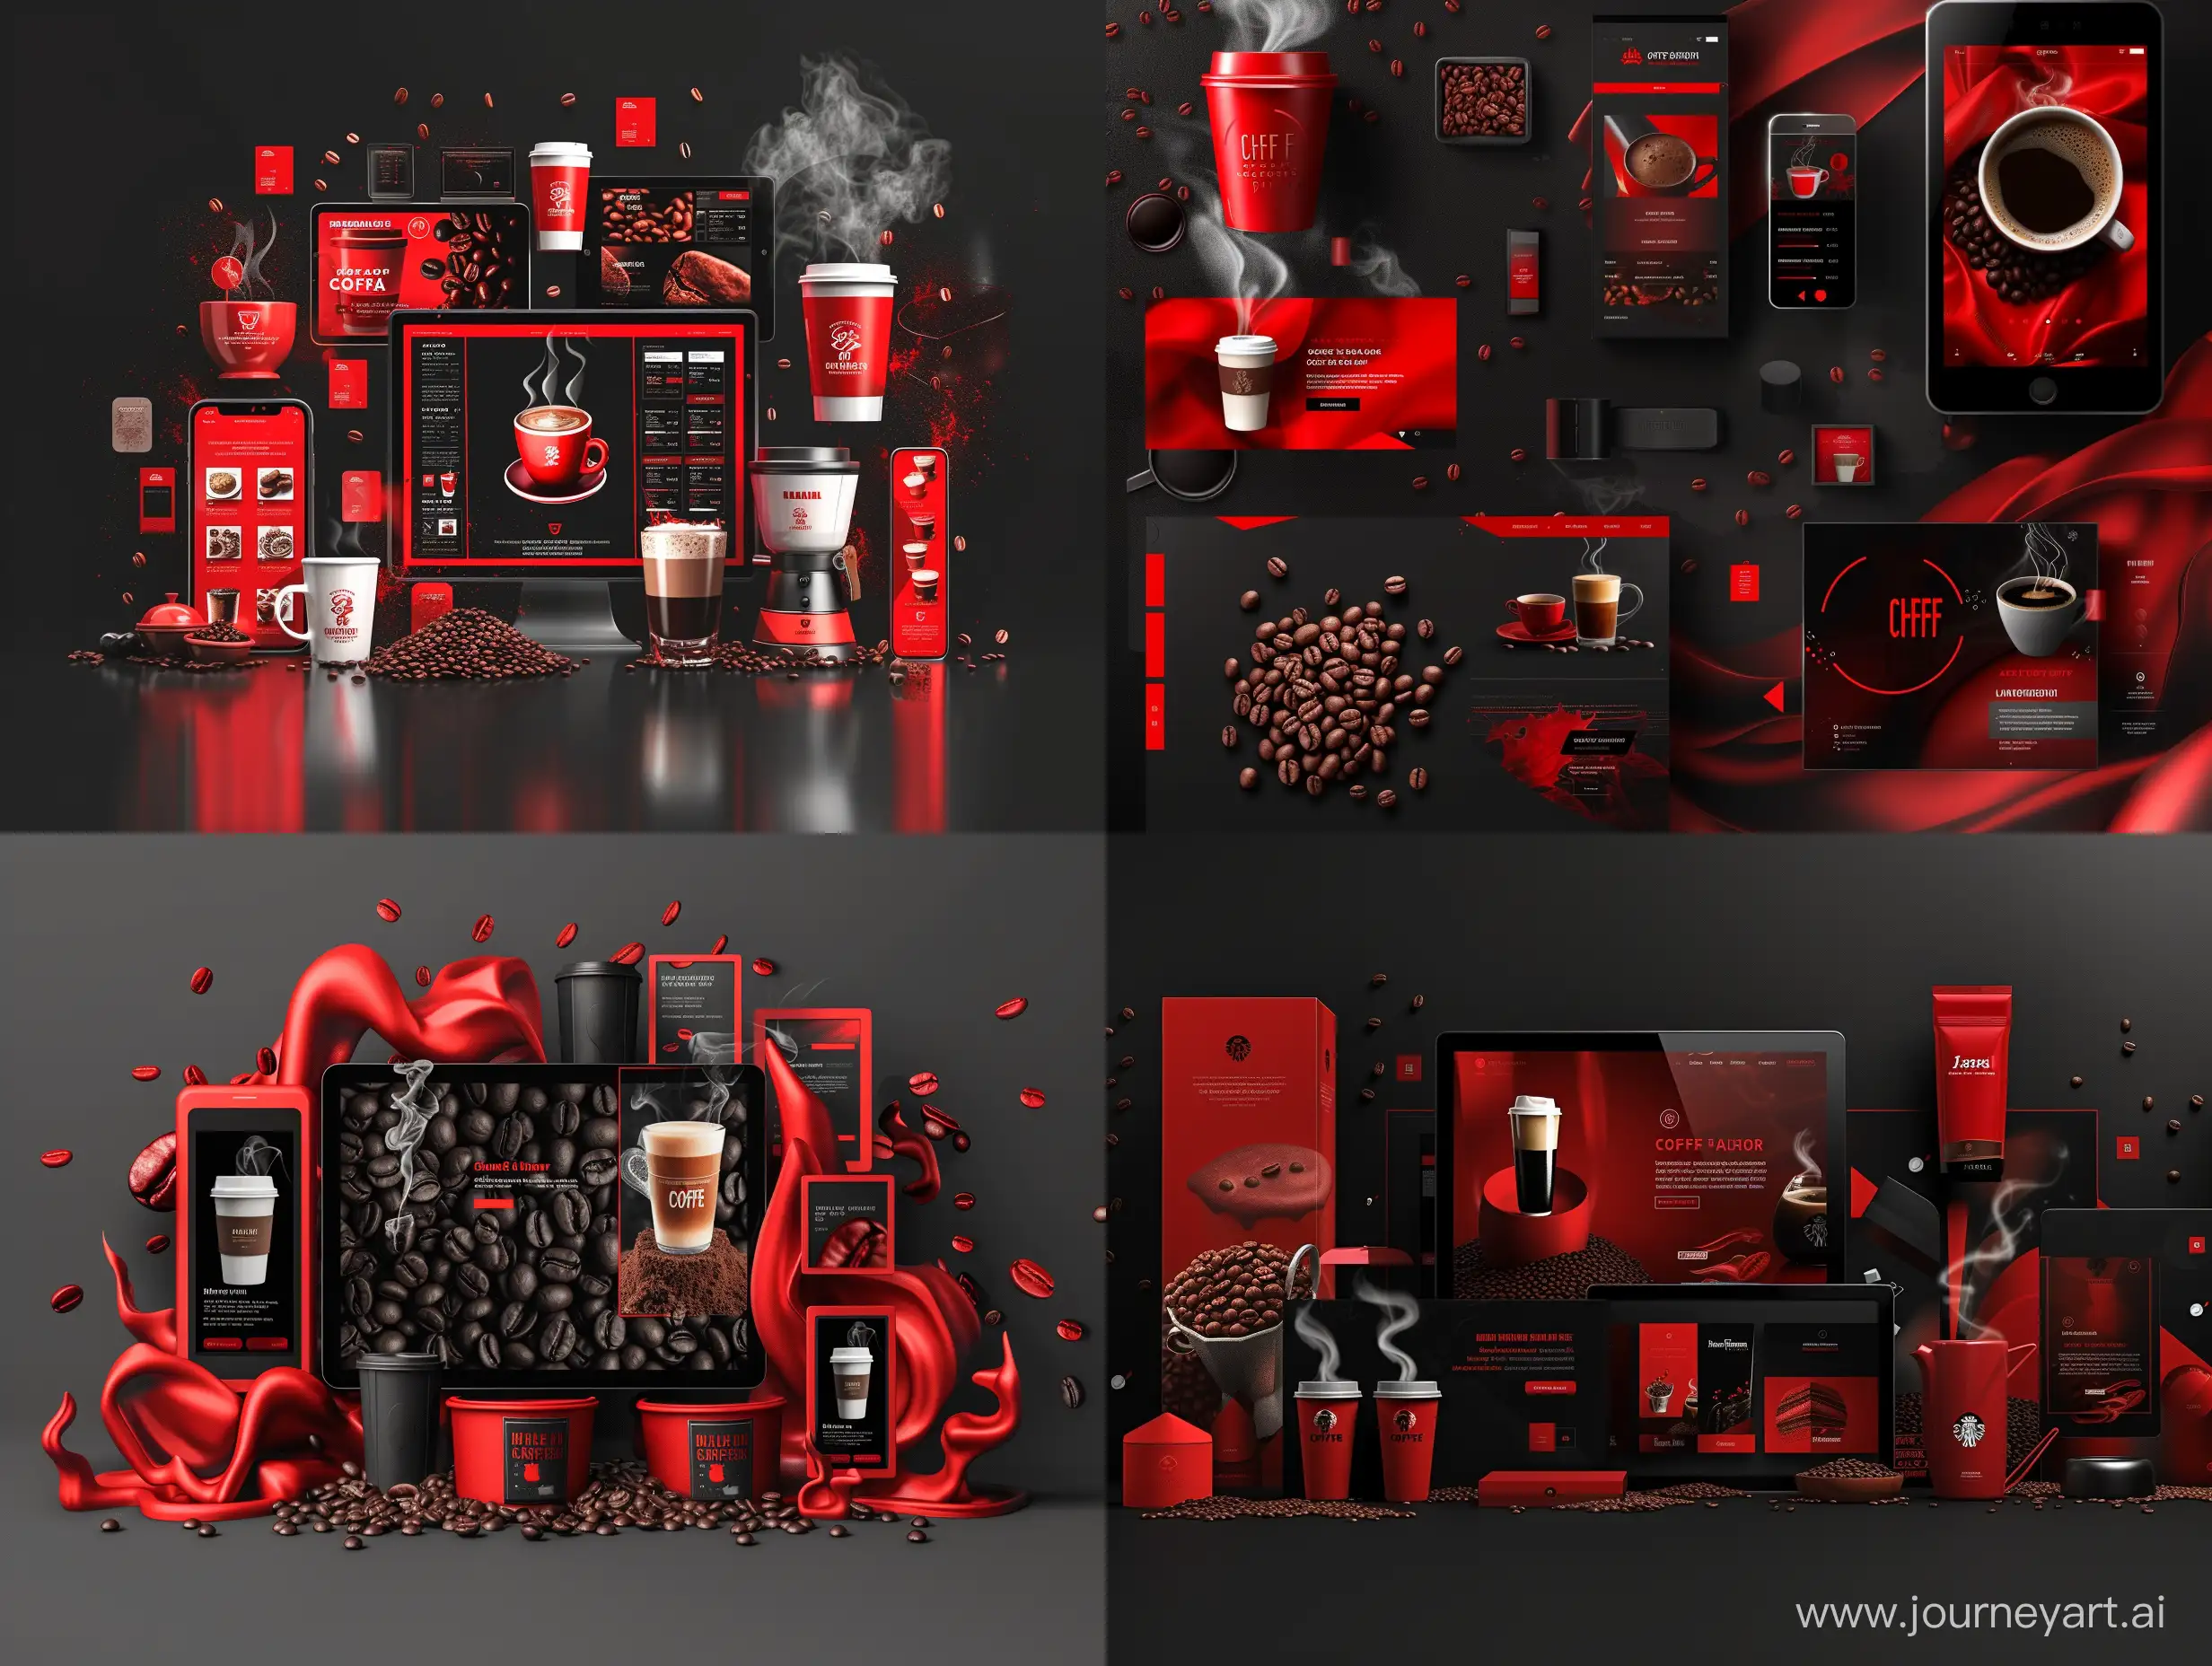 Create a realistic and striking design representing the digital advertisements of a coffee company. Utilize red and black colors along with modern digital advertising elements and coffee-related details to emphasize the brand's strength and appeal. Incorporate details such as coffee beans, steaming cups, digital advertising billboards or screens to form the basis of the advertisement. The design should exude a cool and modern feel while being realistic and attention-grabbing. Ensure to capture viewers' attention and effectively convey the brand's message by crafting an impressive and engaging composition visually.